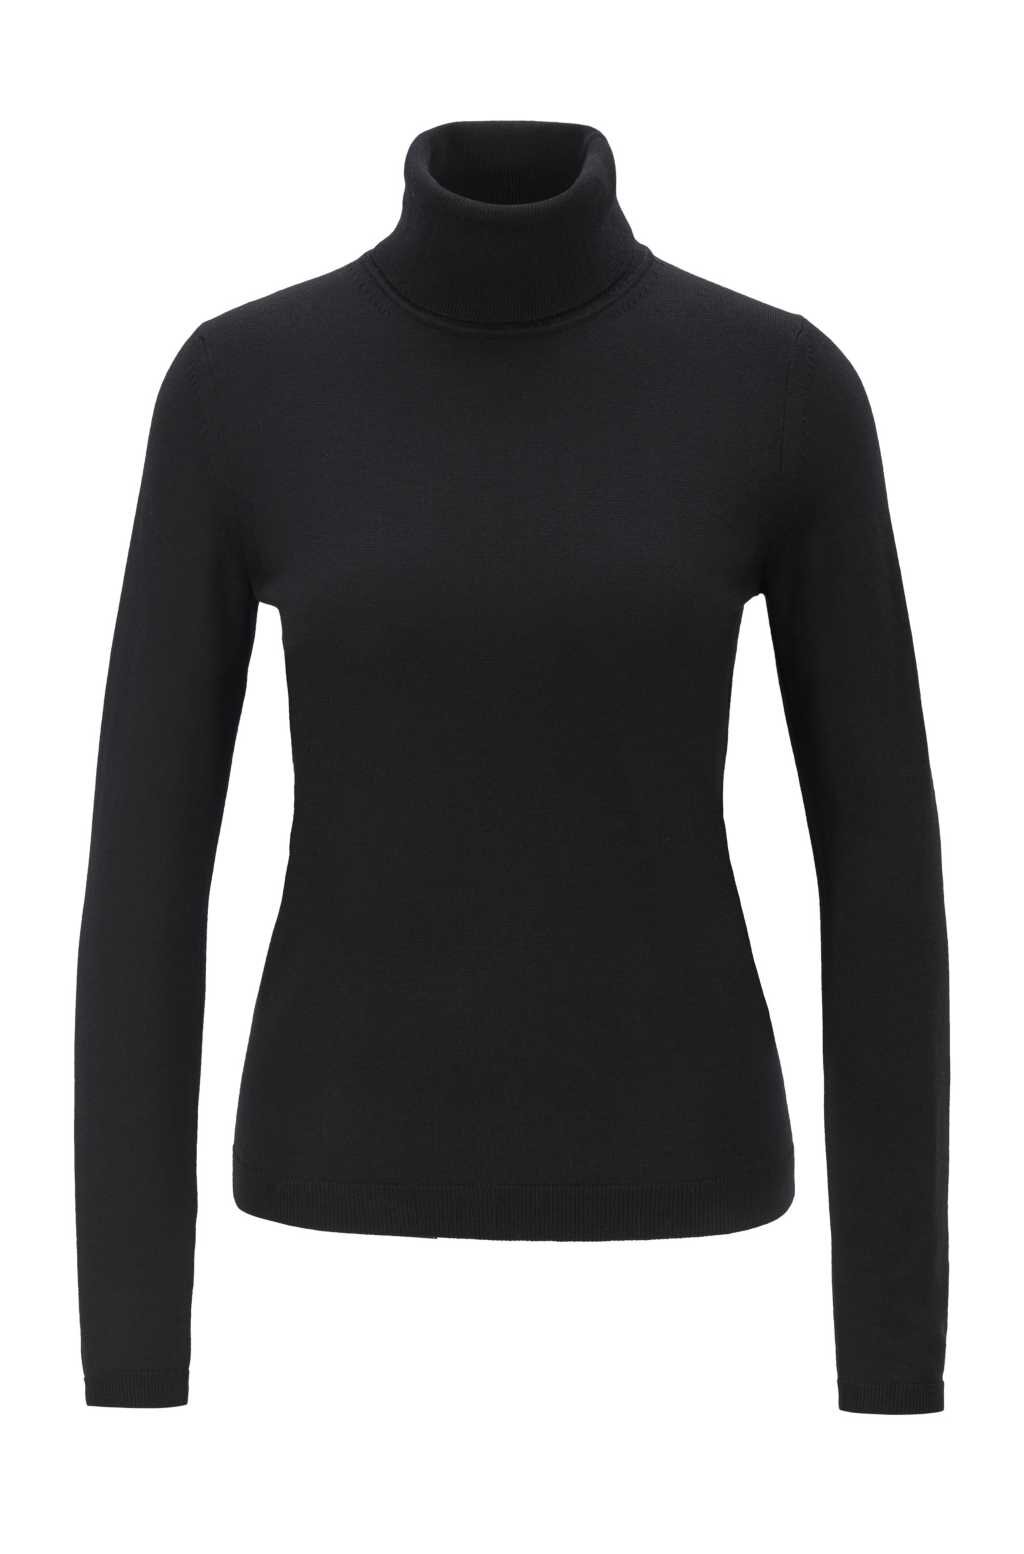 Hugo Boss Famaurie Roll-Neck Sweater in Black — UFO No More